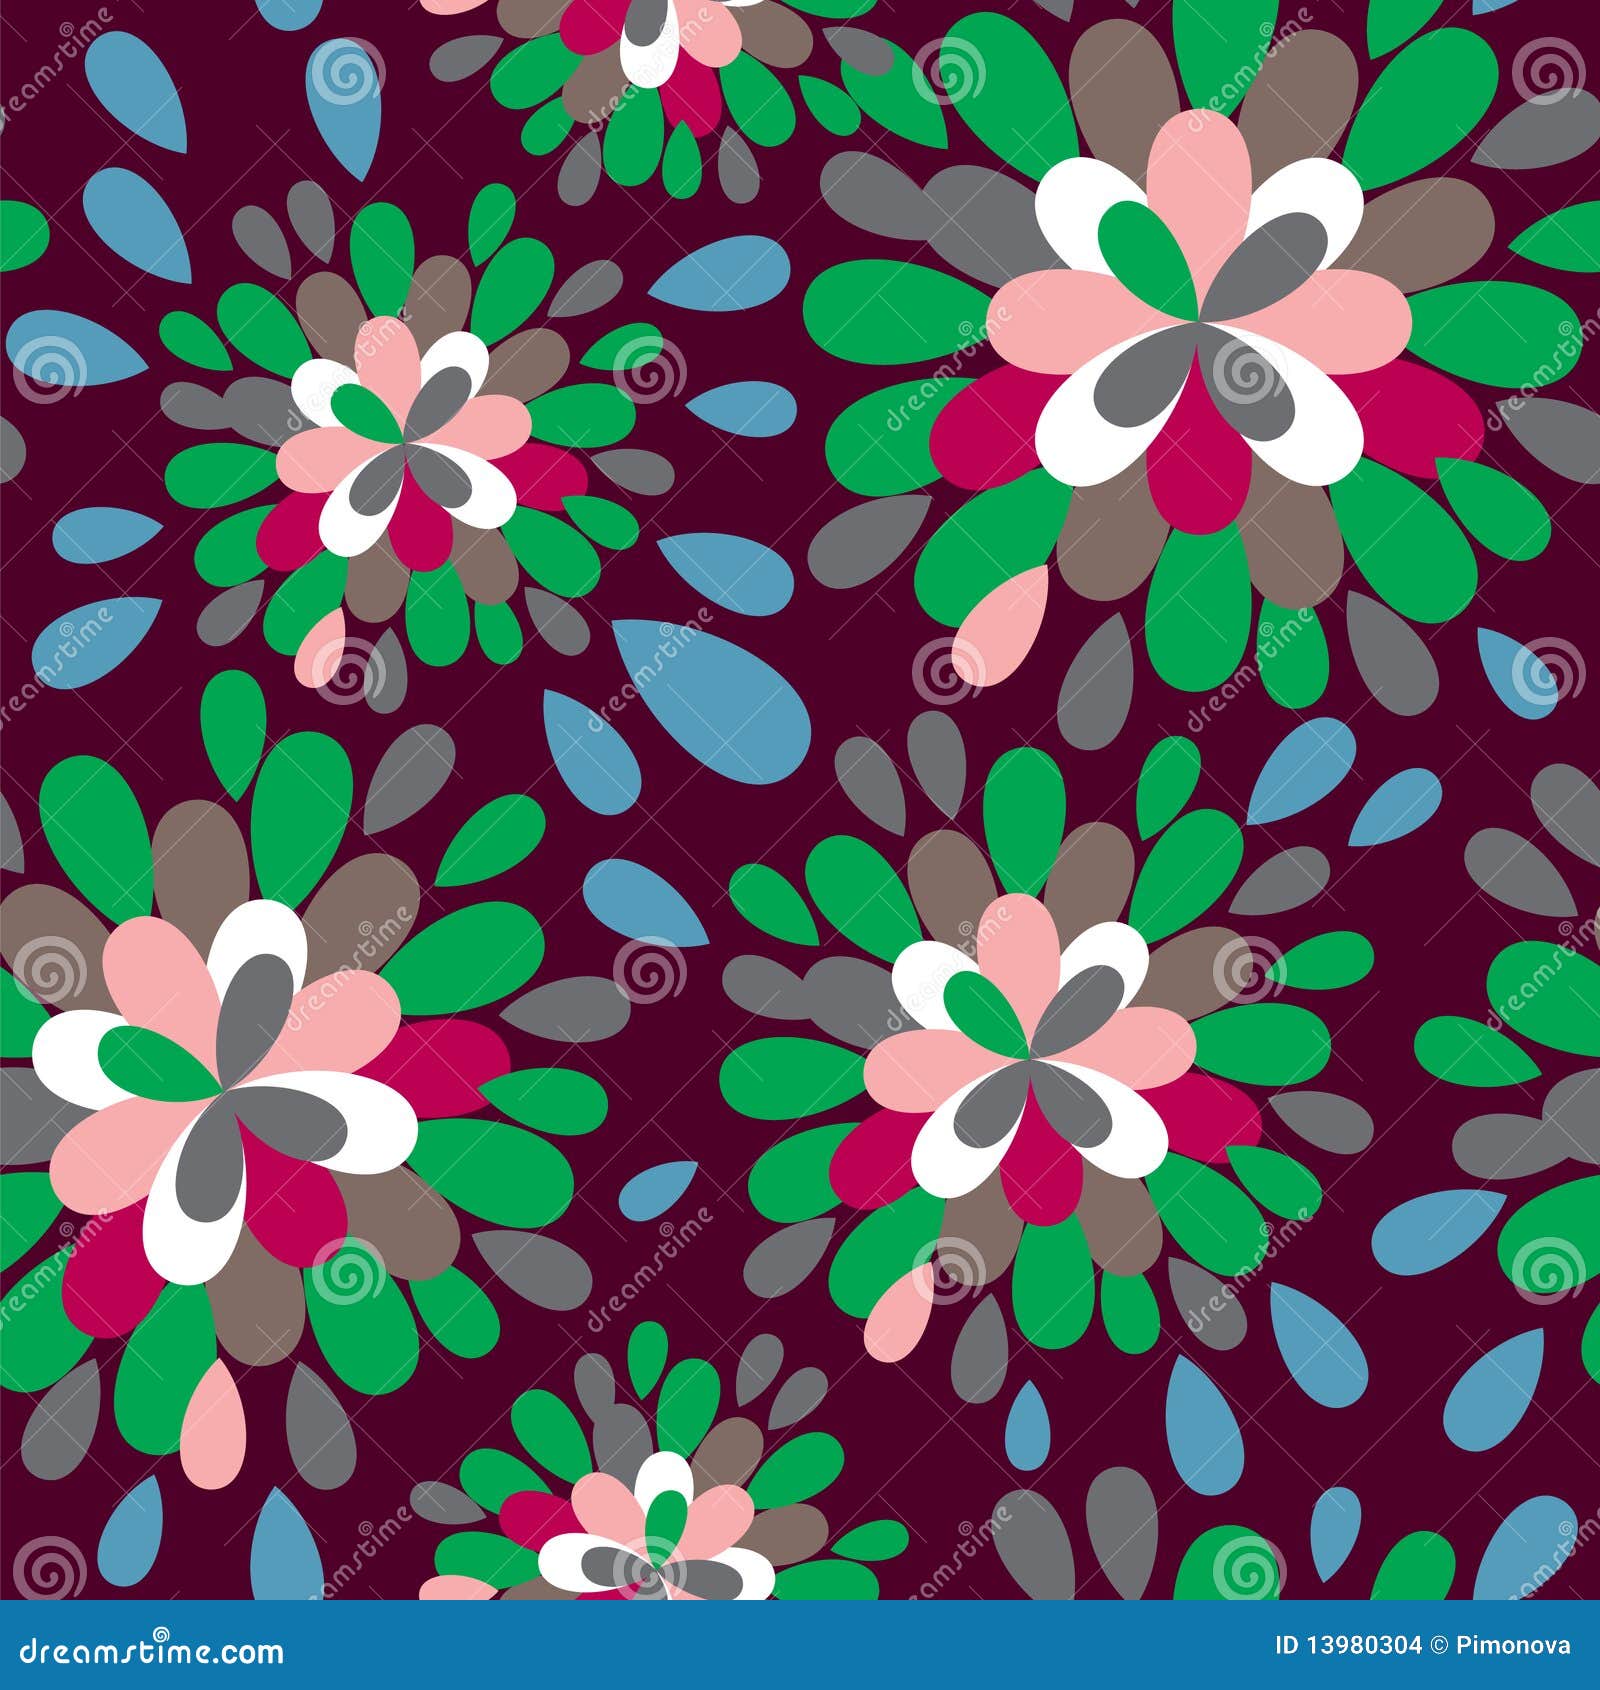 Abstract floral pattern, seamless background